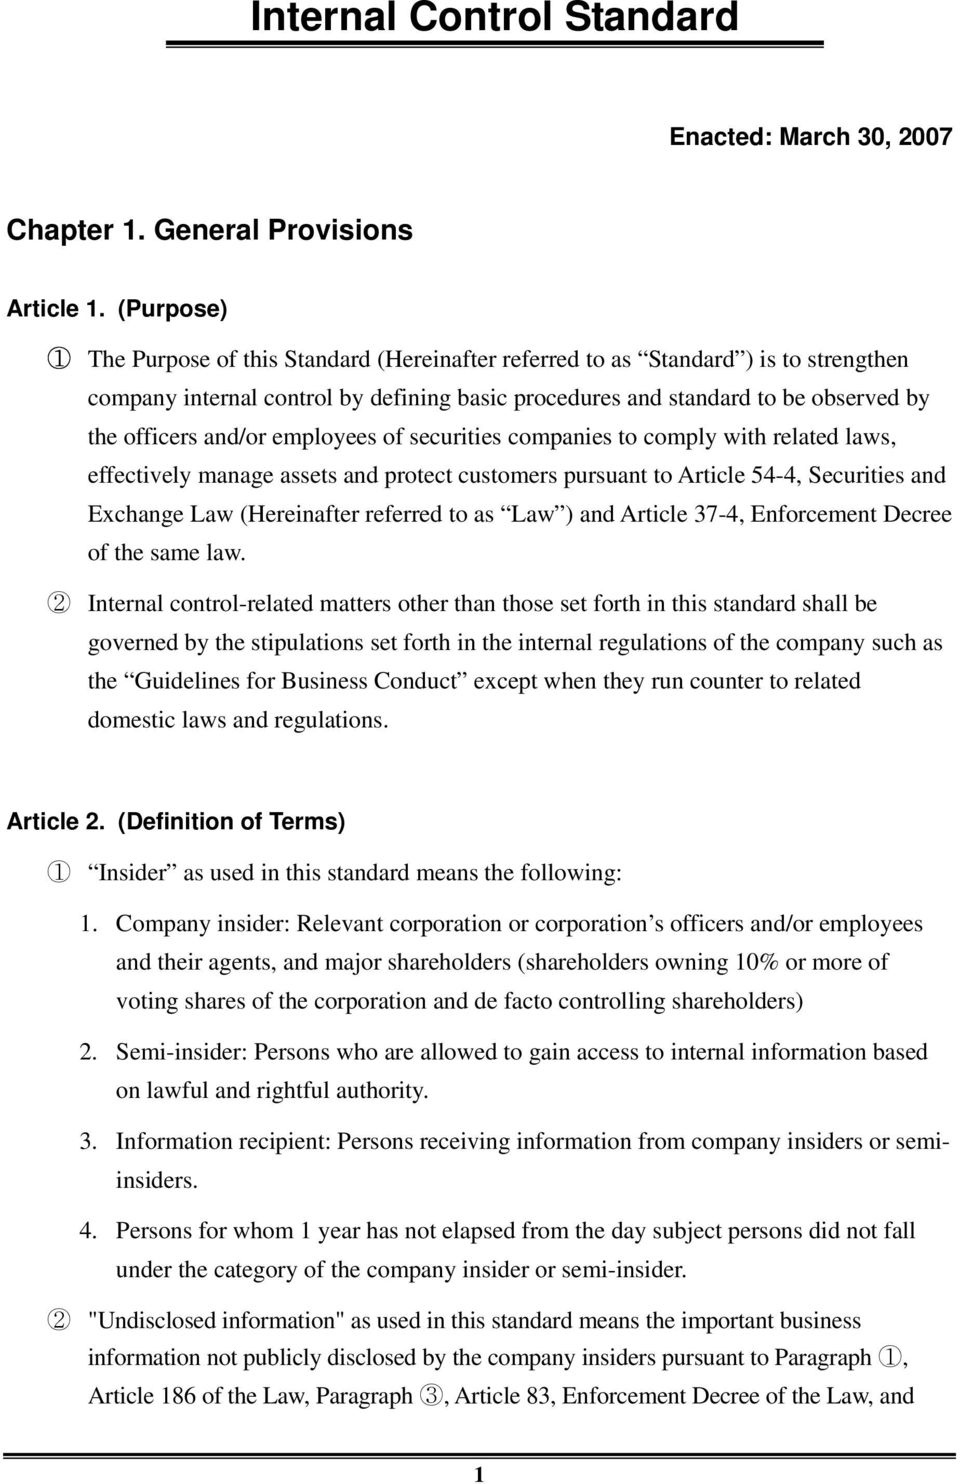 and/or employees of securities companies to comply with related laws, effectively manage assets and protect customers pursuant to Article 54-4, Securities and Exchange Law (Hereinafter referred to as